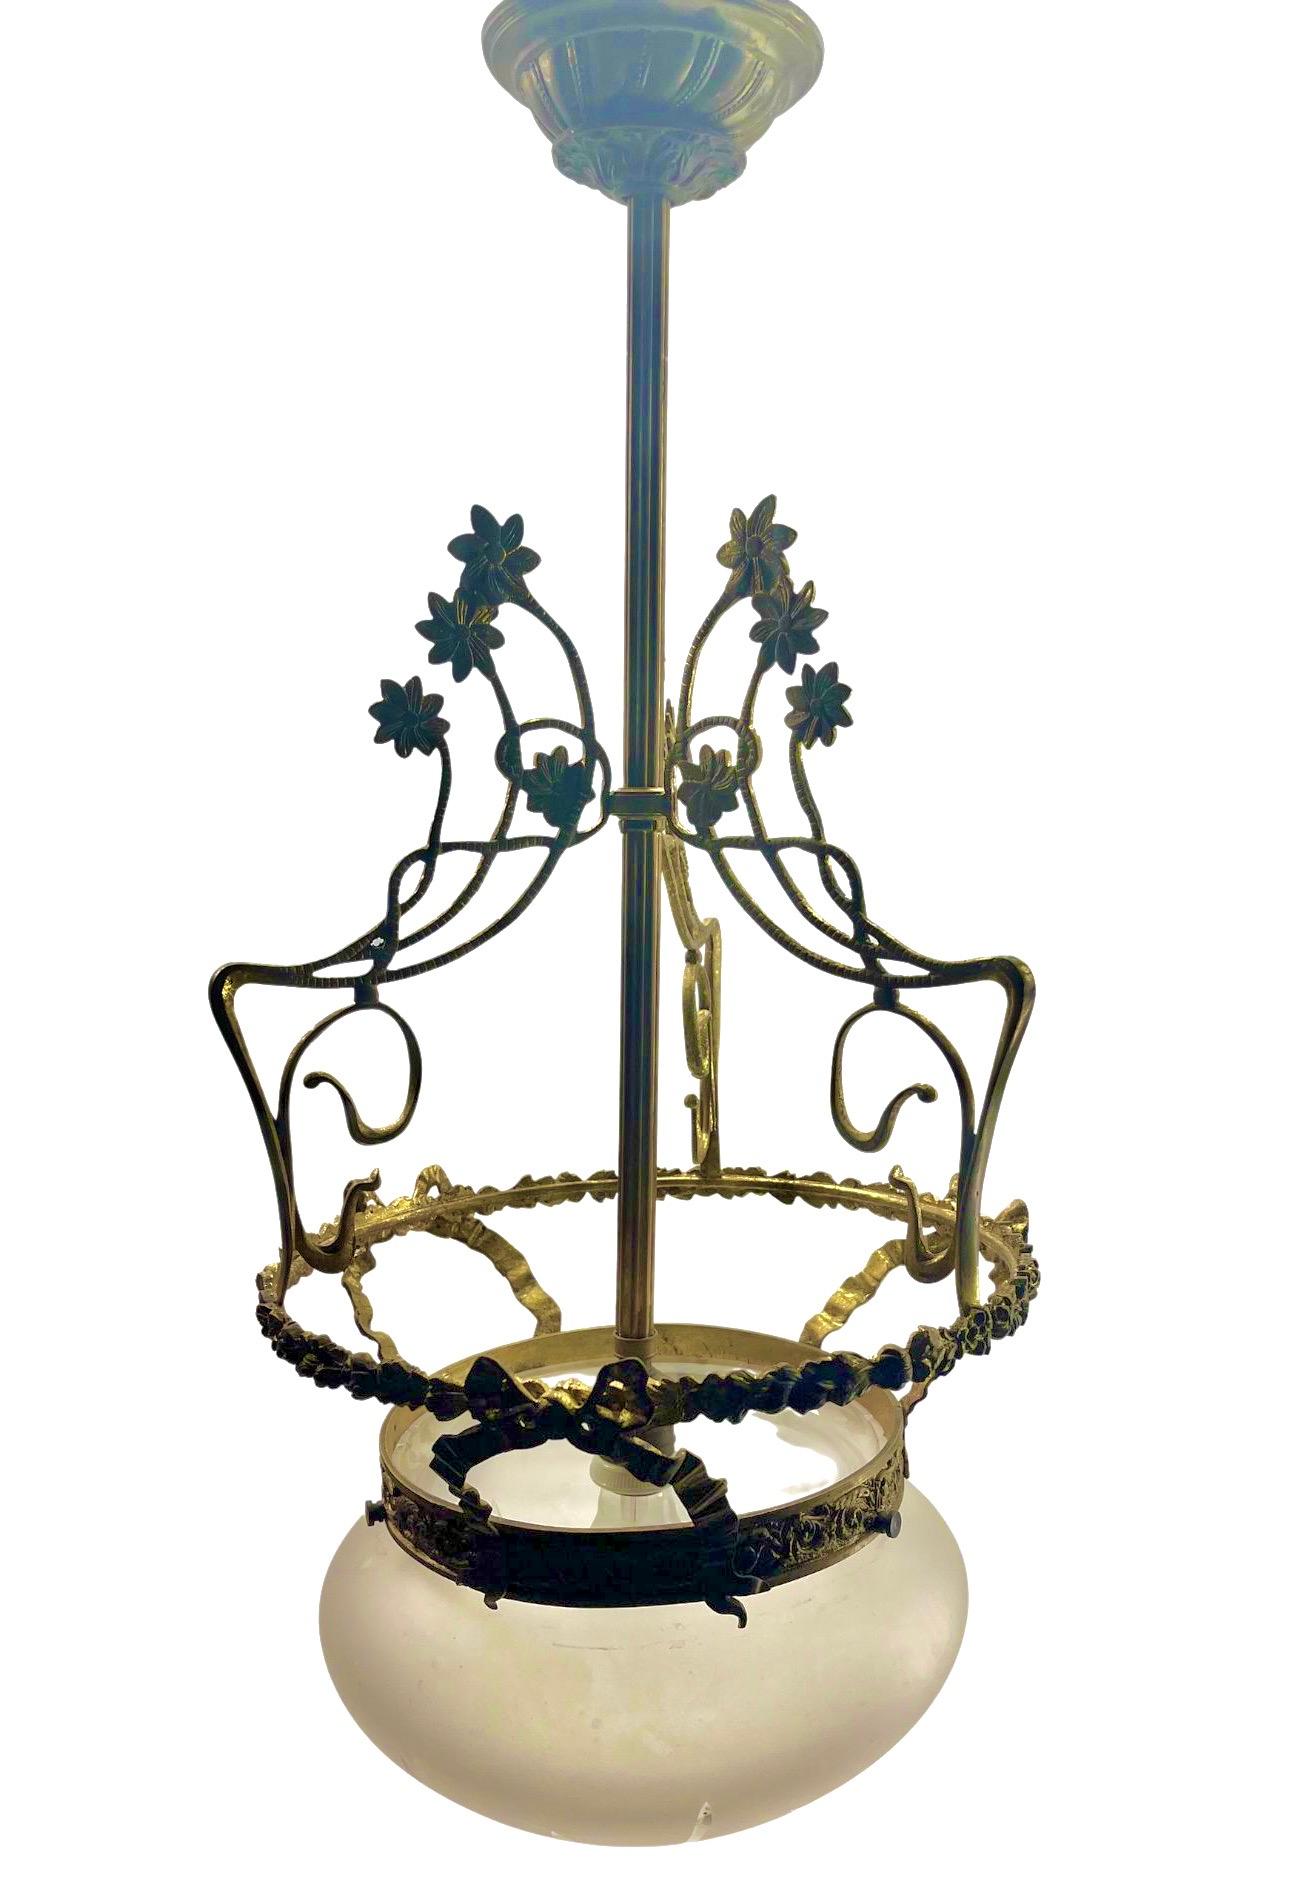 Art Nouveau Solid Brass Chandelier With Floral Decorations  1930s

Photography fails to capture the simple elegant illumination provided by this lamp.
In Good condition and in full working order having recently been re-wired and Originel fitting